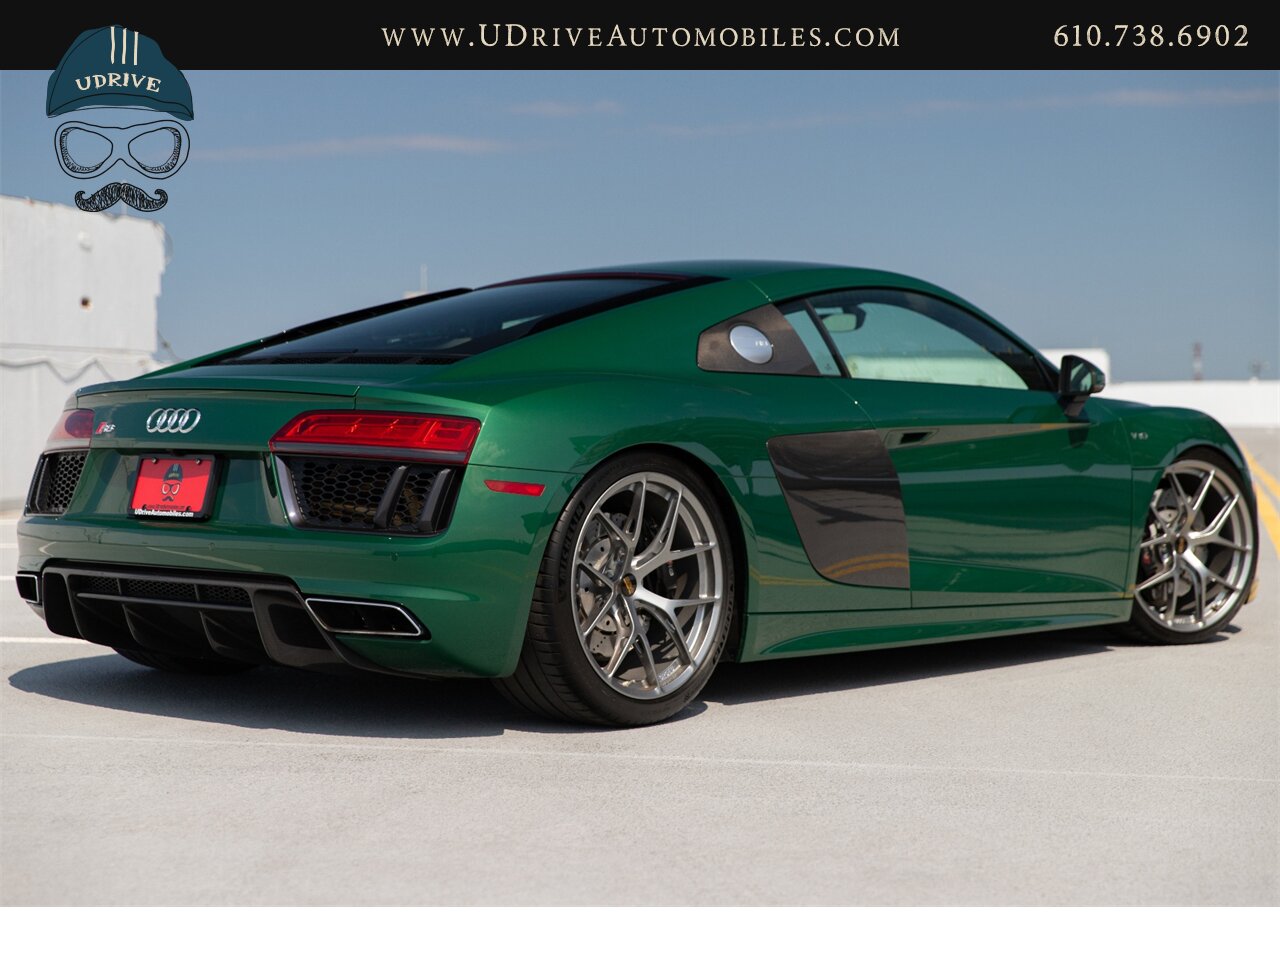 2017 Audi R8 Audi Exclusive Avocado Green Vermont Brown Leather  Diamond Stitching V10 Carbon Fiber - Photo 3 - West Chester, PA 19382